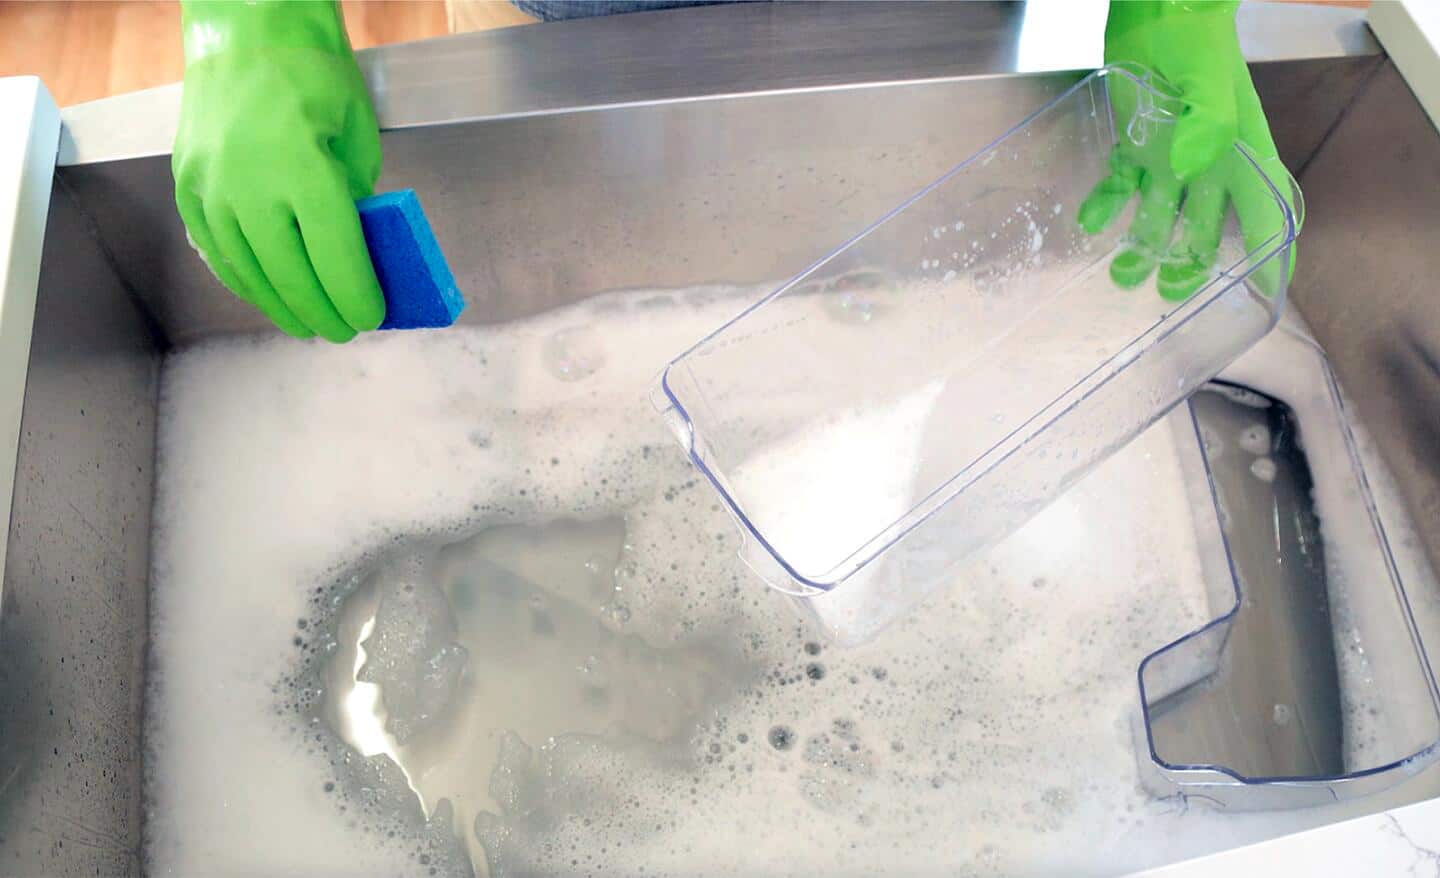 A person wearing gloves washes a removable refrigerator container in a sink filled with soapy water.